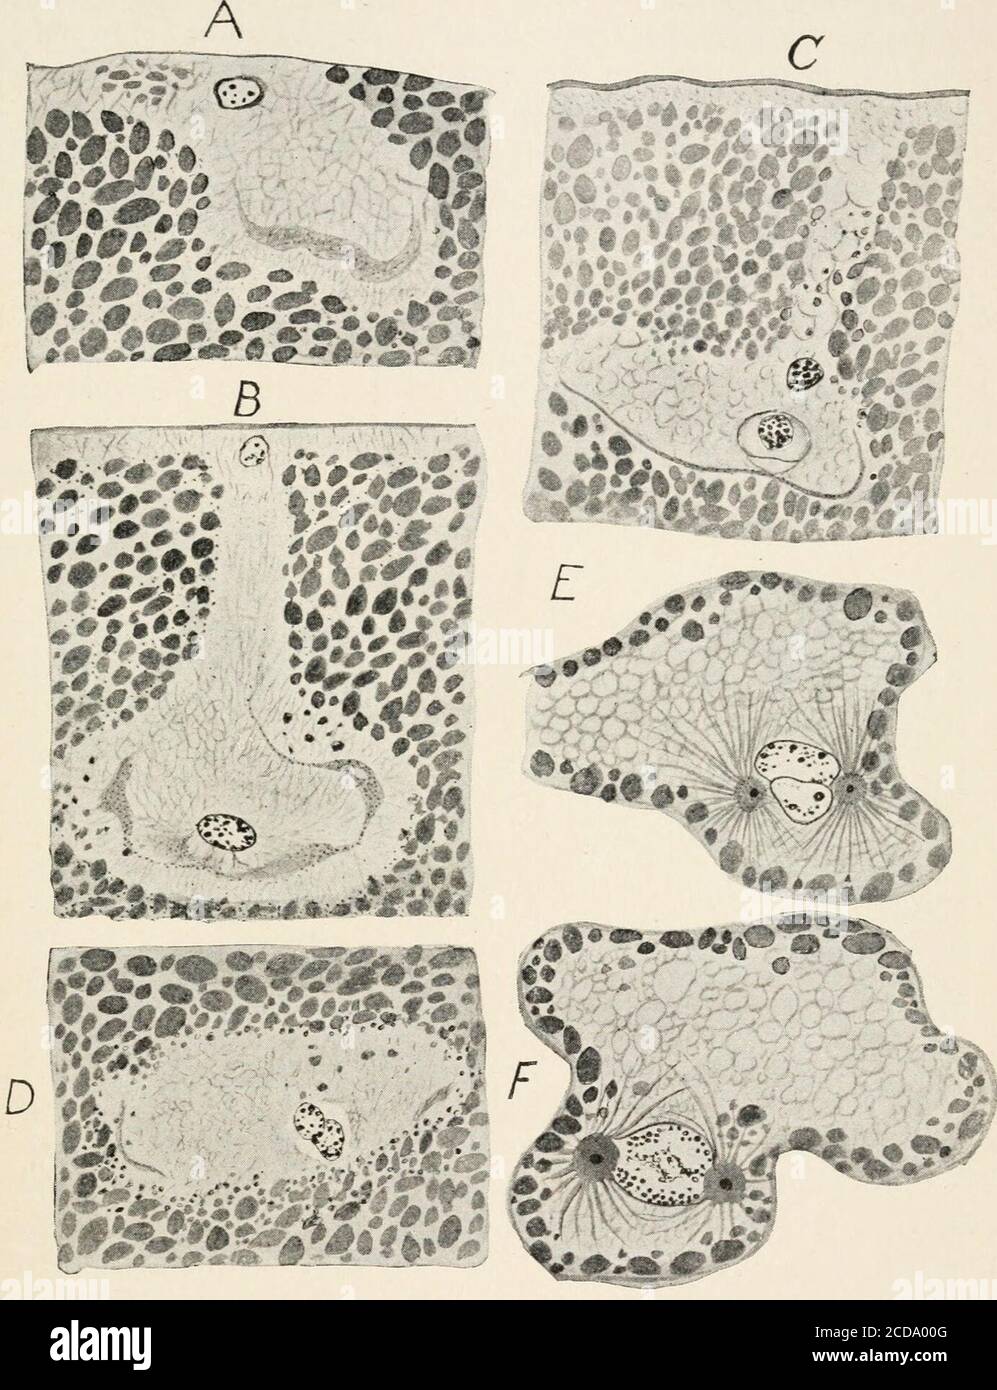 . Evolution and animal life; an elementary discussion of facts, processes, laws and theories relating to the life and evolution of animals .  FIG. 124.—Spermatozoa of different animals: 1, Man; 2, Vesperugo; 3, pig; 4, rat;5, finch; 6, triton; 7, ray; 8, beetle; 9, mole cricket; 10, snail. (After Ballowitz,Kolliker, and Rath.) productive cells into two kinds. These two kinds, among allanimals, are always essentially similar to the two kinds shown */ »/ by Volvox and the simplest of the many-celled animals-namely, large, inactive, spherical egg cells, and small, active,elongate or tailed sperm Stock Photo